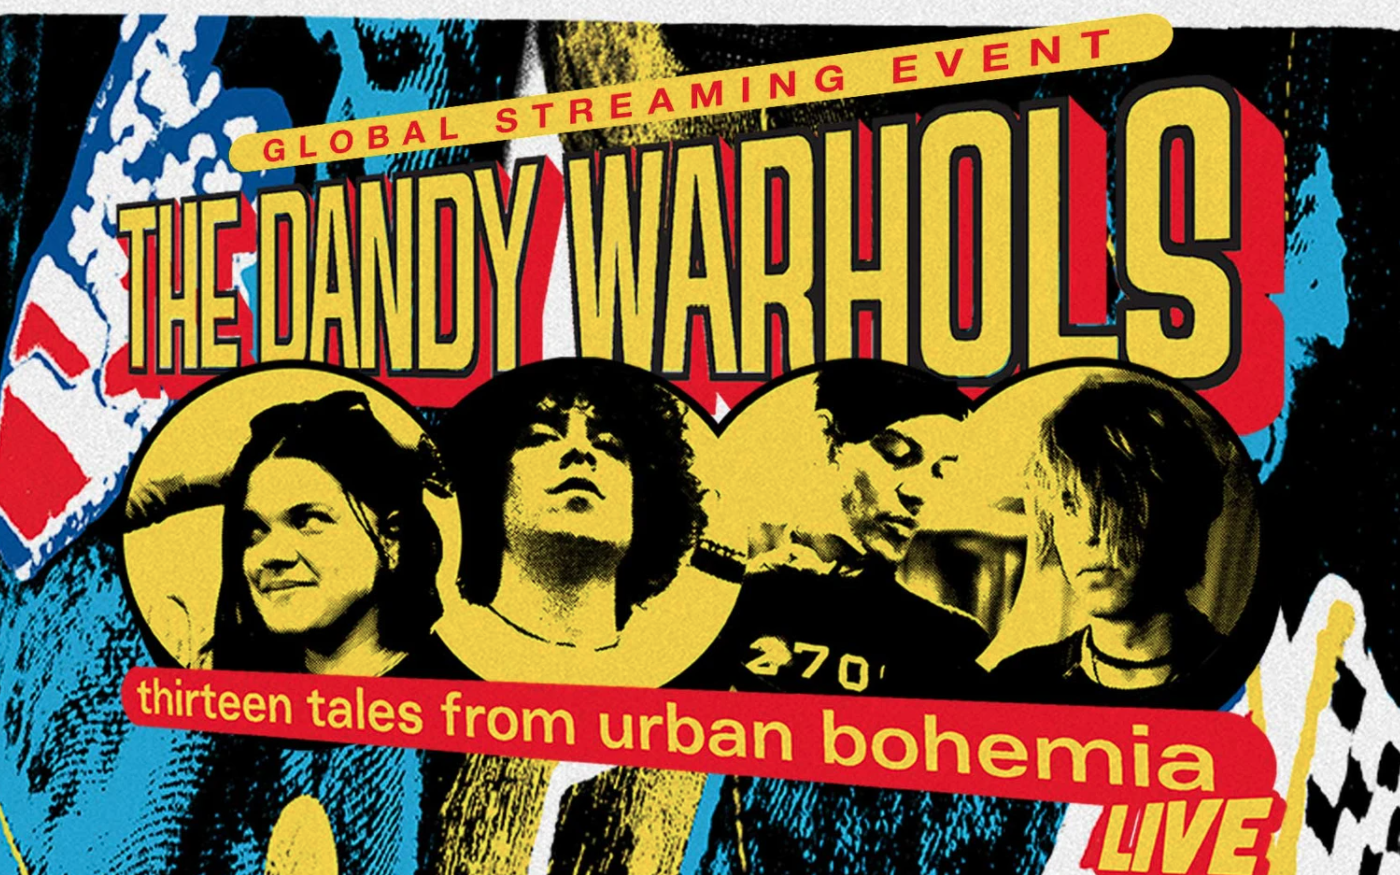 The Dandy Warhols 13 x 20: A 20th Anniversary Concert Celebrating 13 Tales From Urban Bohemia